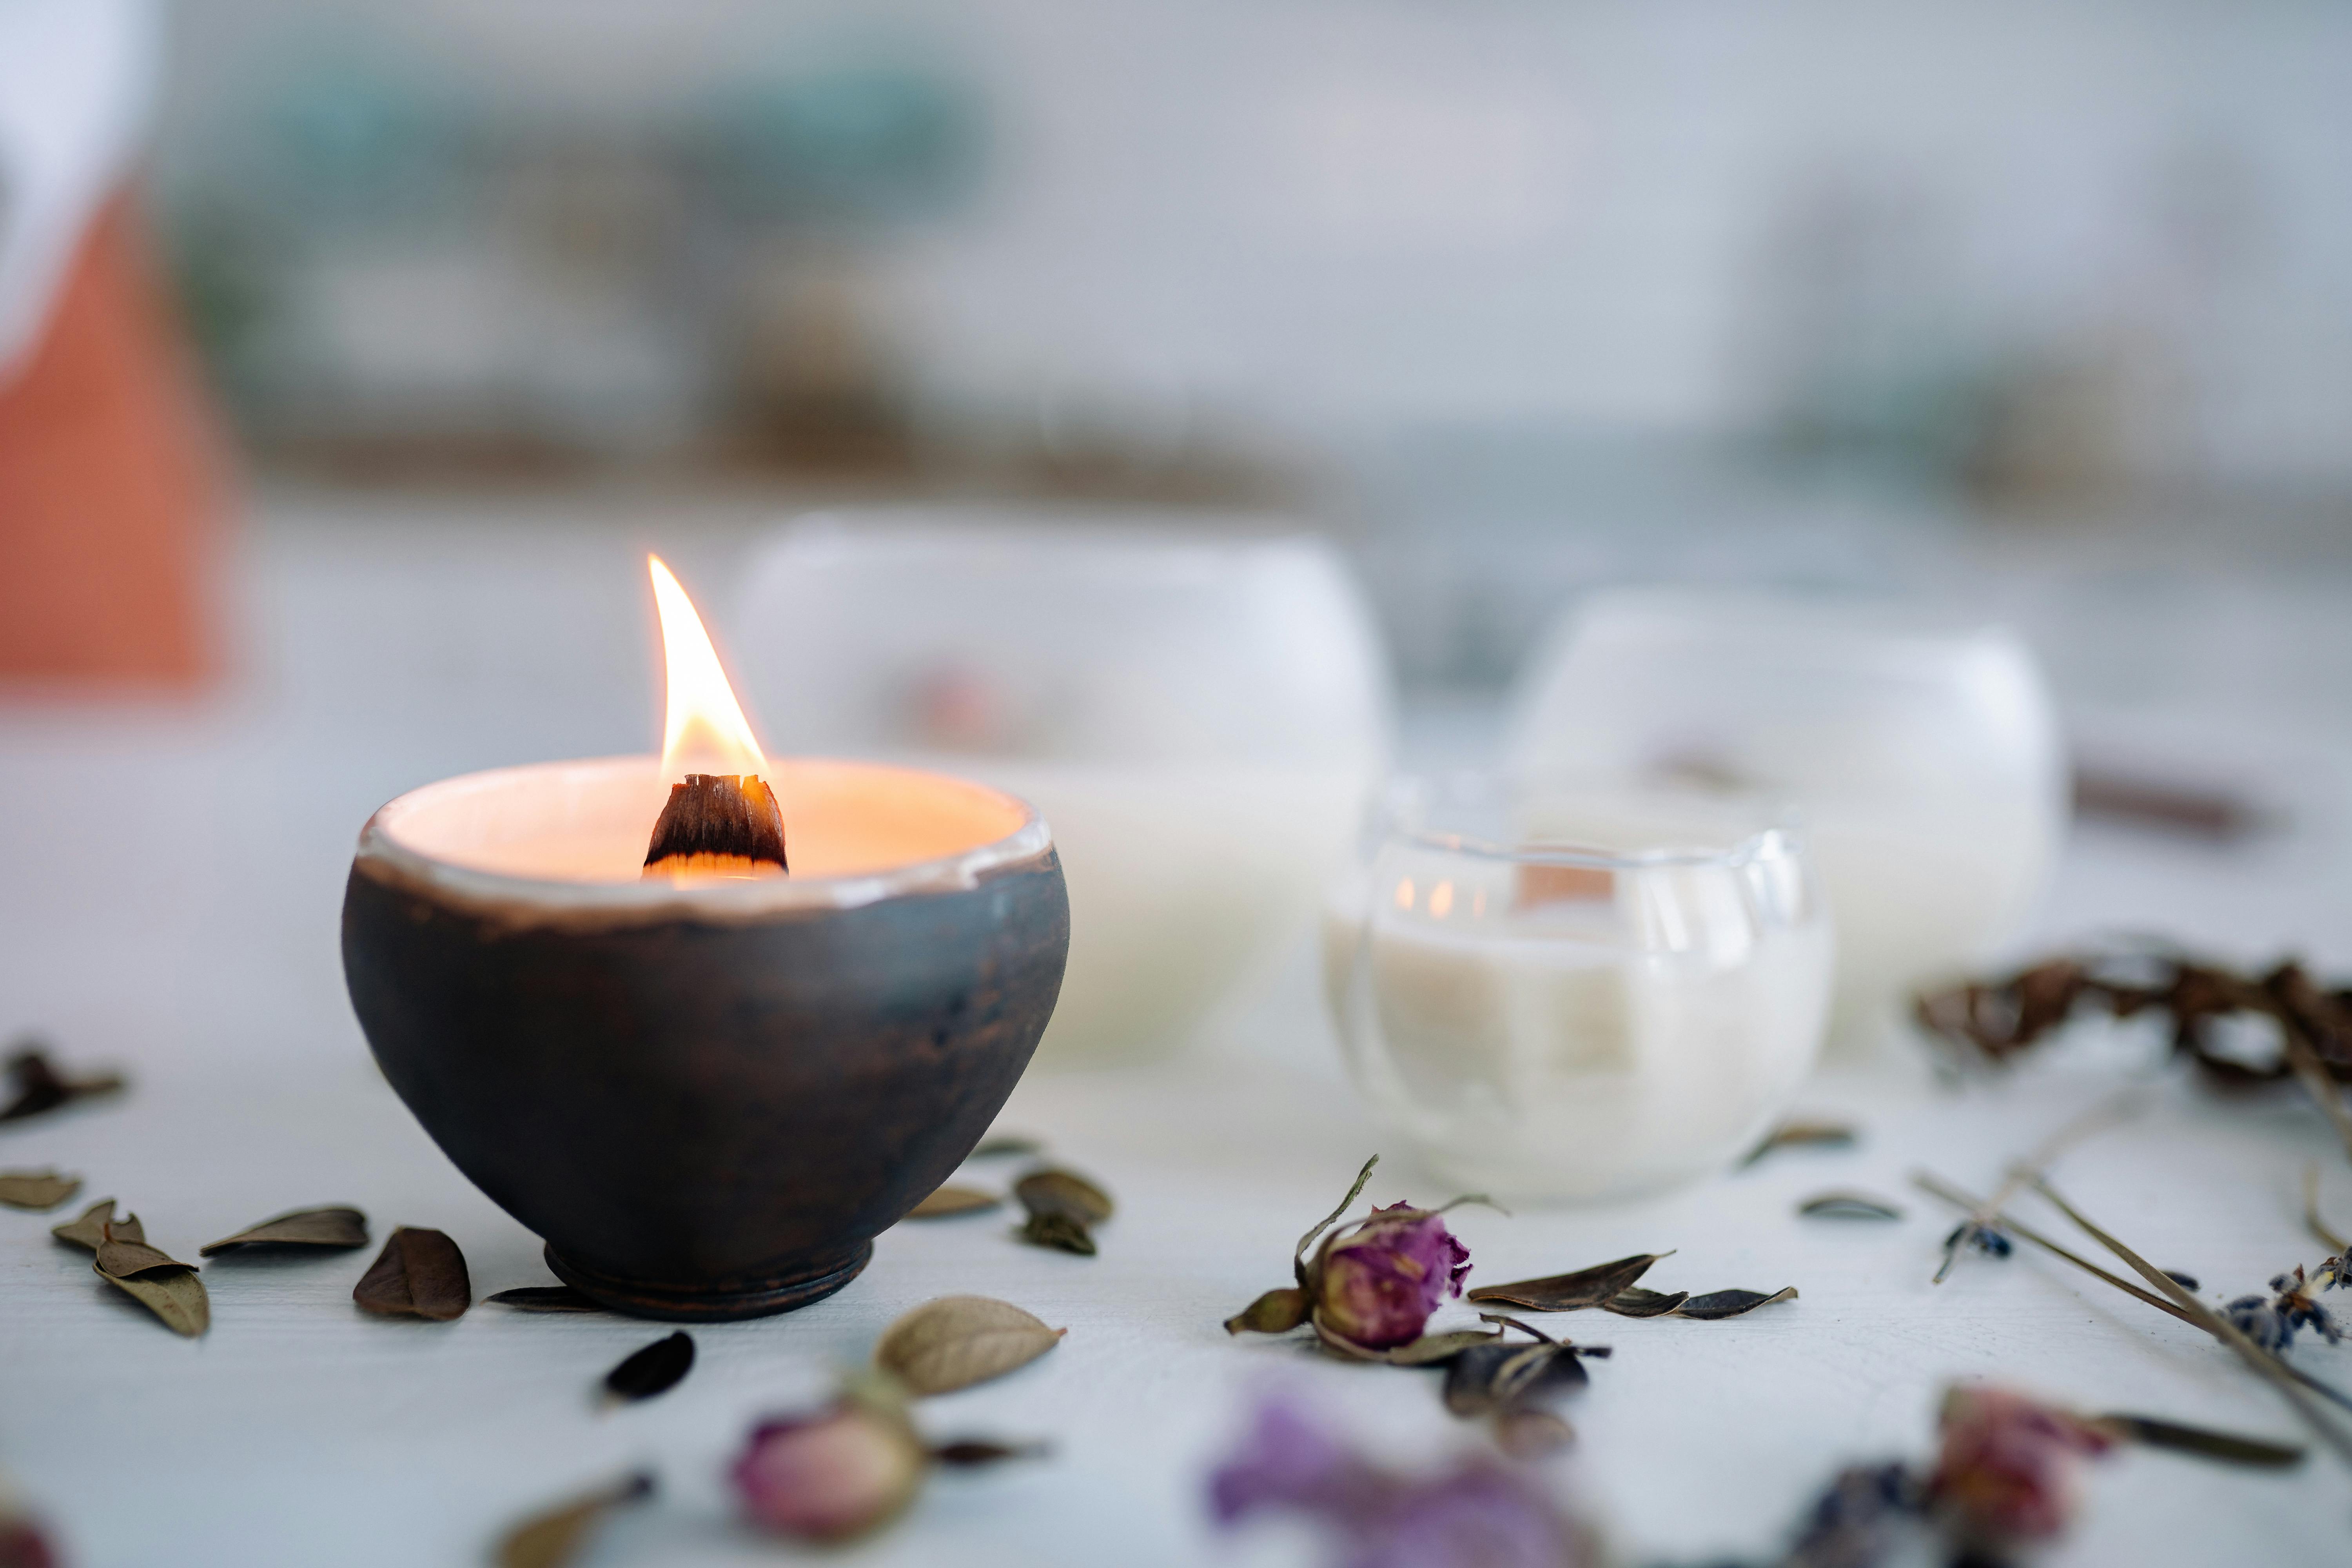 A burning candle on a ceramic container | Source: Pexels